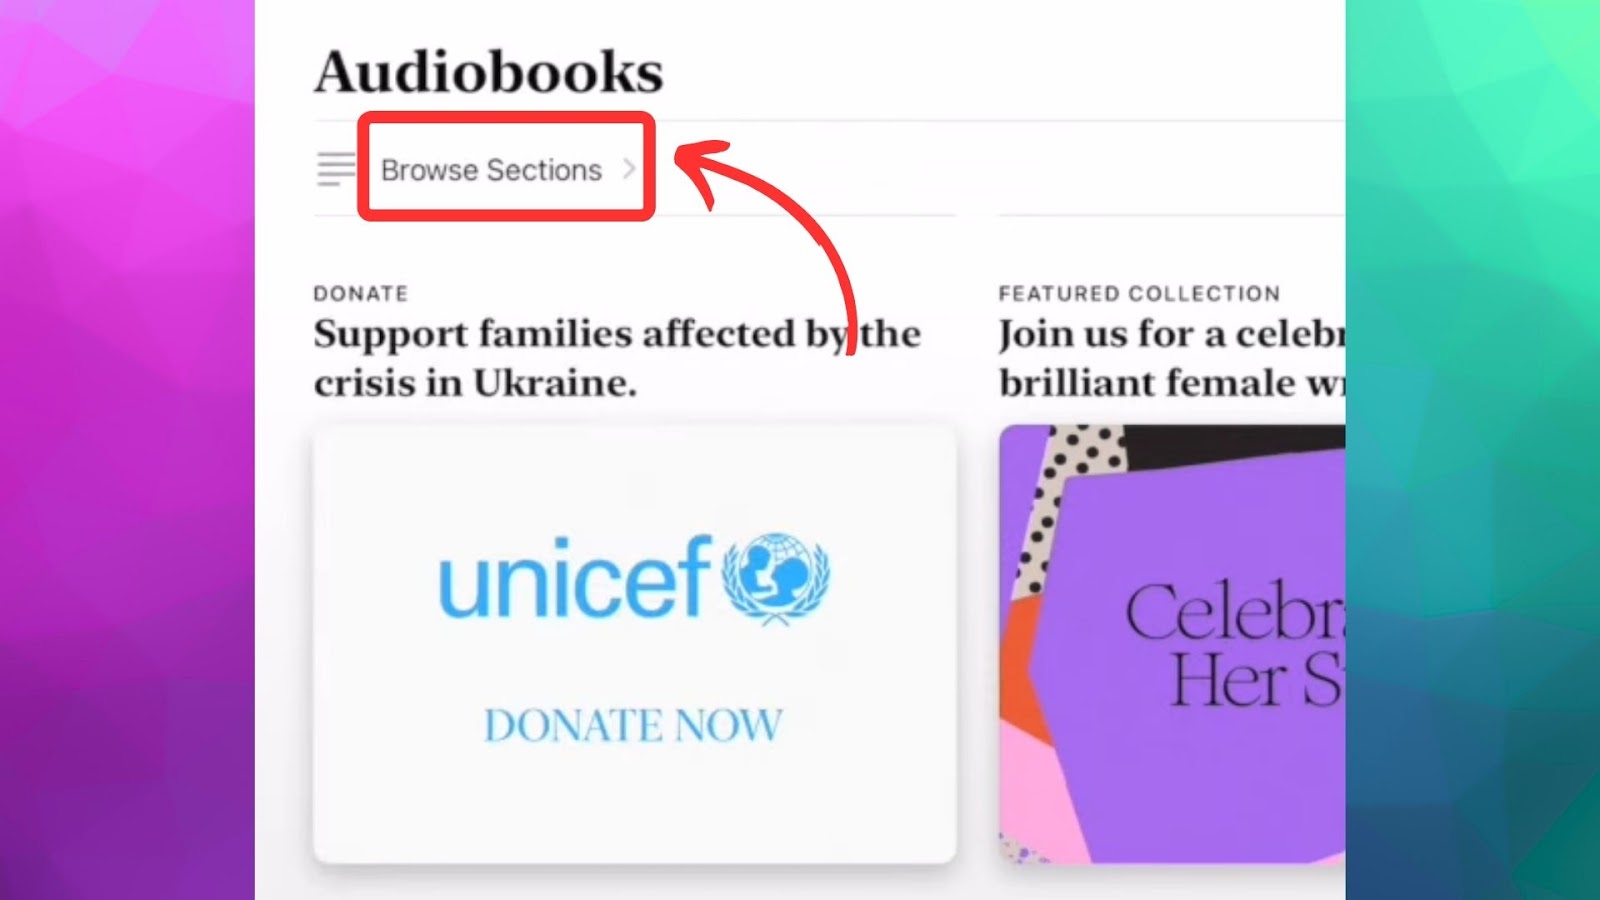 Click iPhone Audiobook App Browse Sections